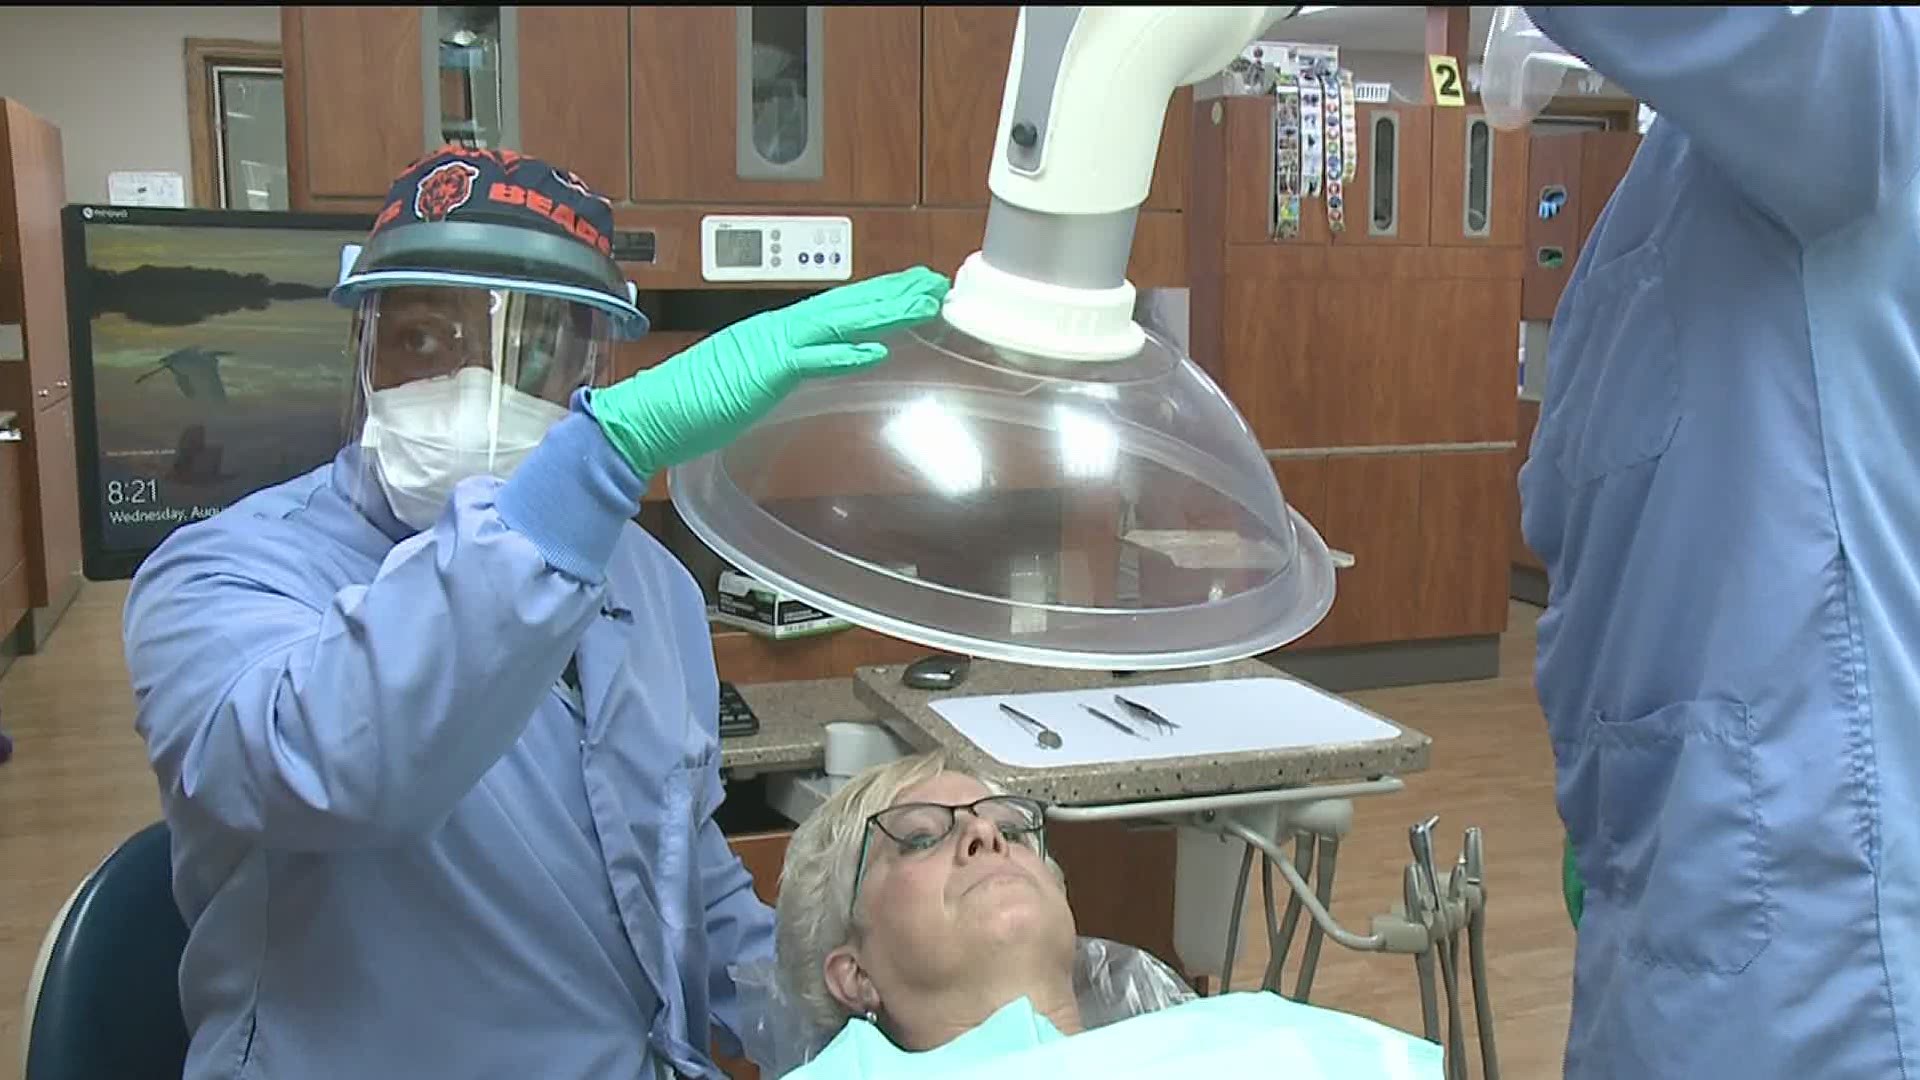 Negative pressure rooms are typically seen in hospitals. This is the first one used in a dentist's office in the Quad Cities region.